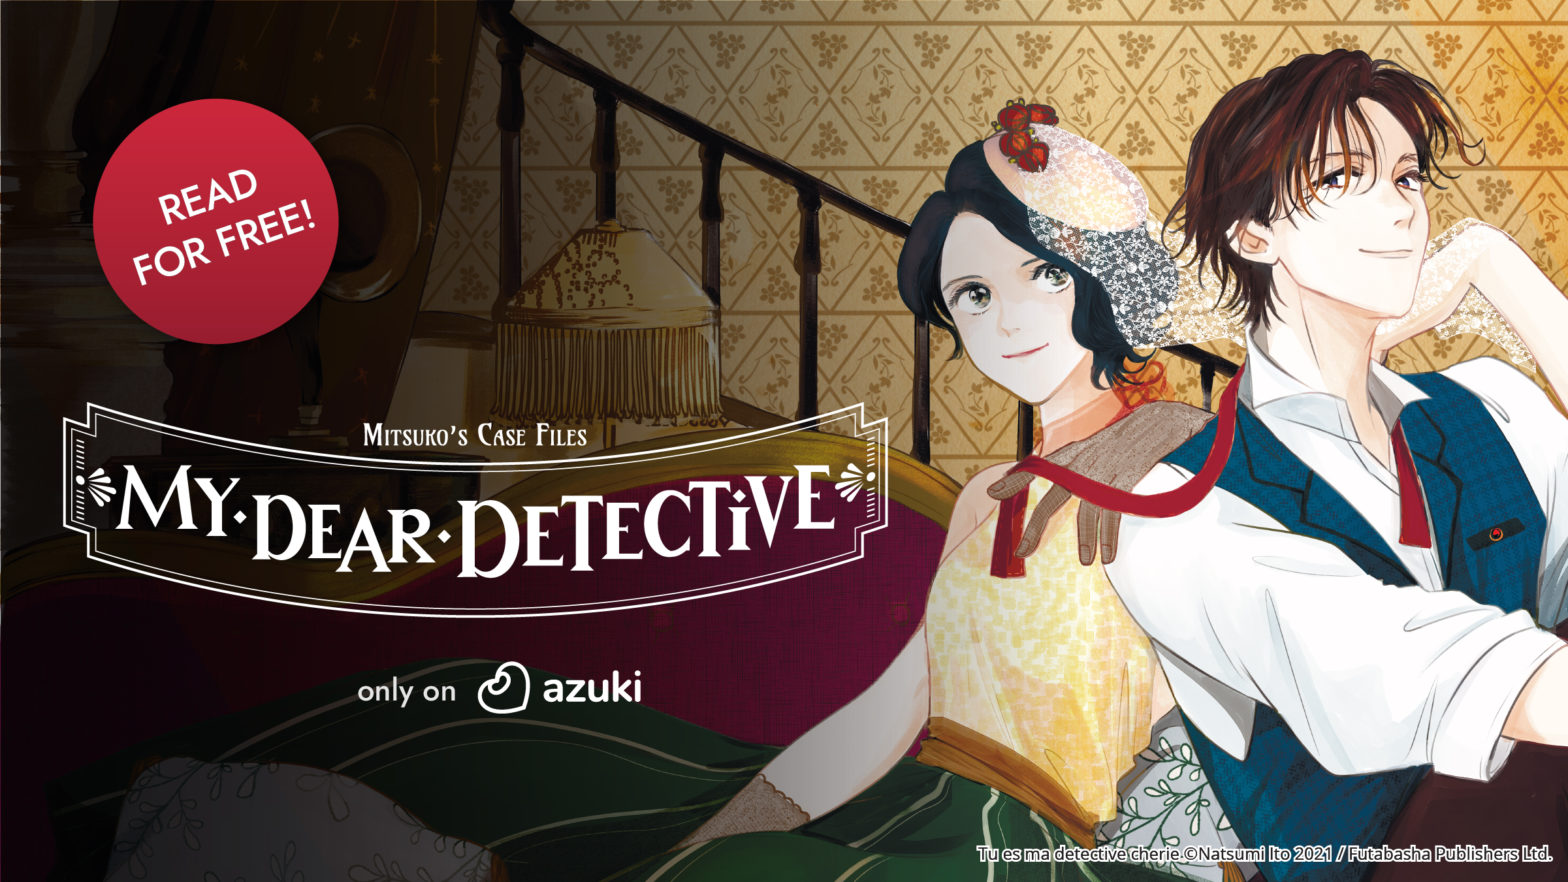 Read for Free! My Dear Detective: Mitusko’s Case Files. Only on Azuki. Mitsuko and Saku are sitting side by side, well dressed.